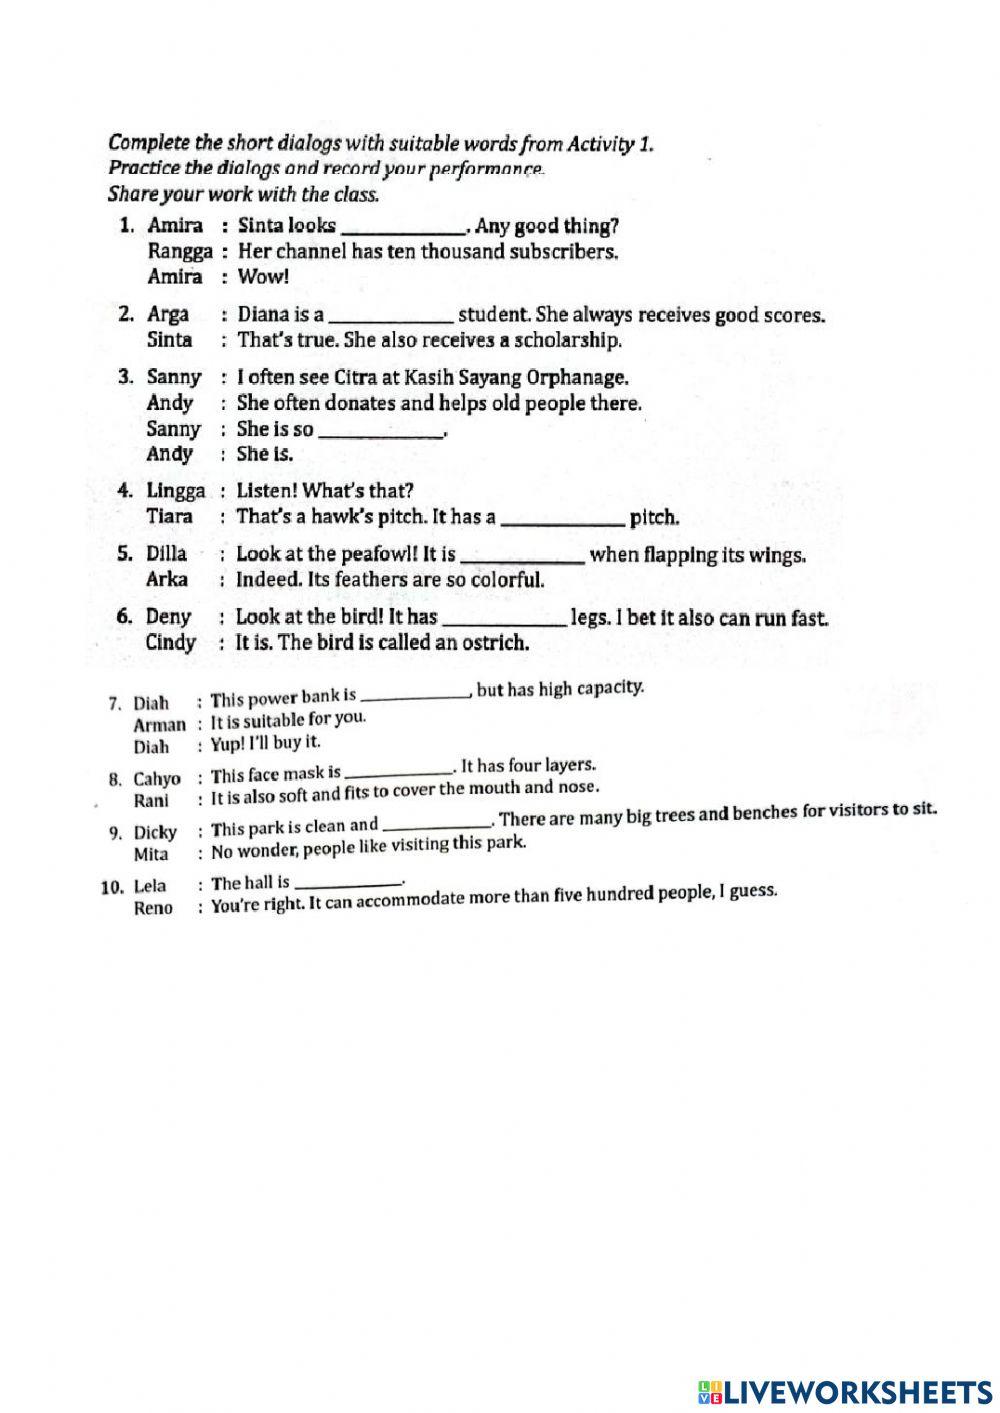 Activities 1-2 Page 1-2